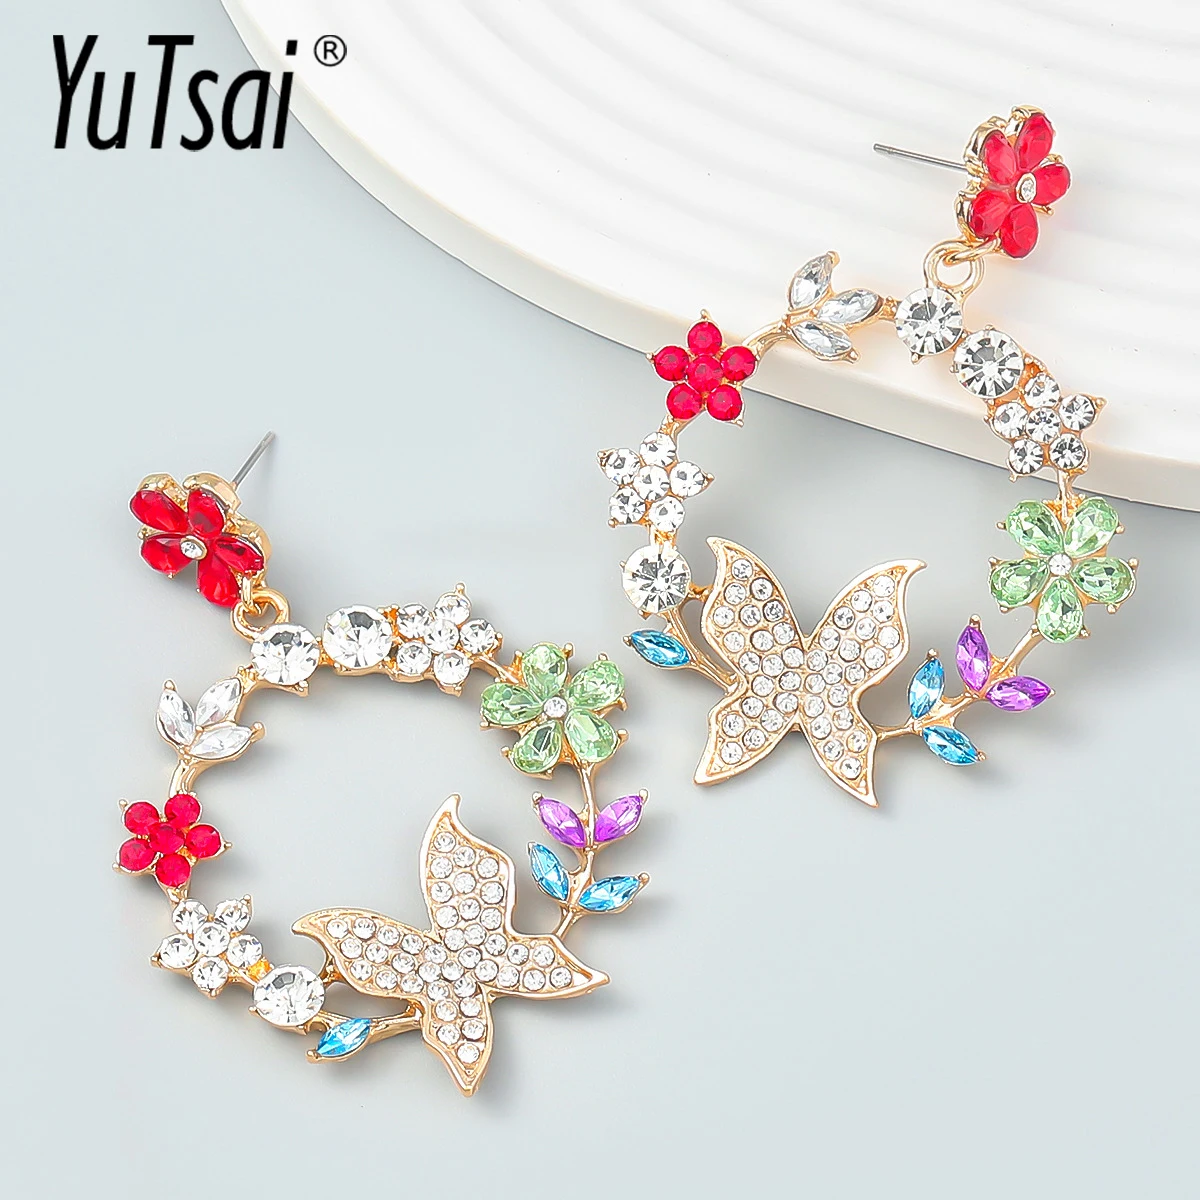 

YUTSAI Romantic 3 Color Garland Butterfly Drop Earrings Elegant Spring Rhinestone Flower Insect Earring for Women Gifts YT1129